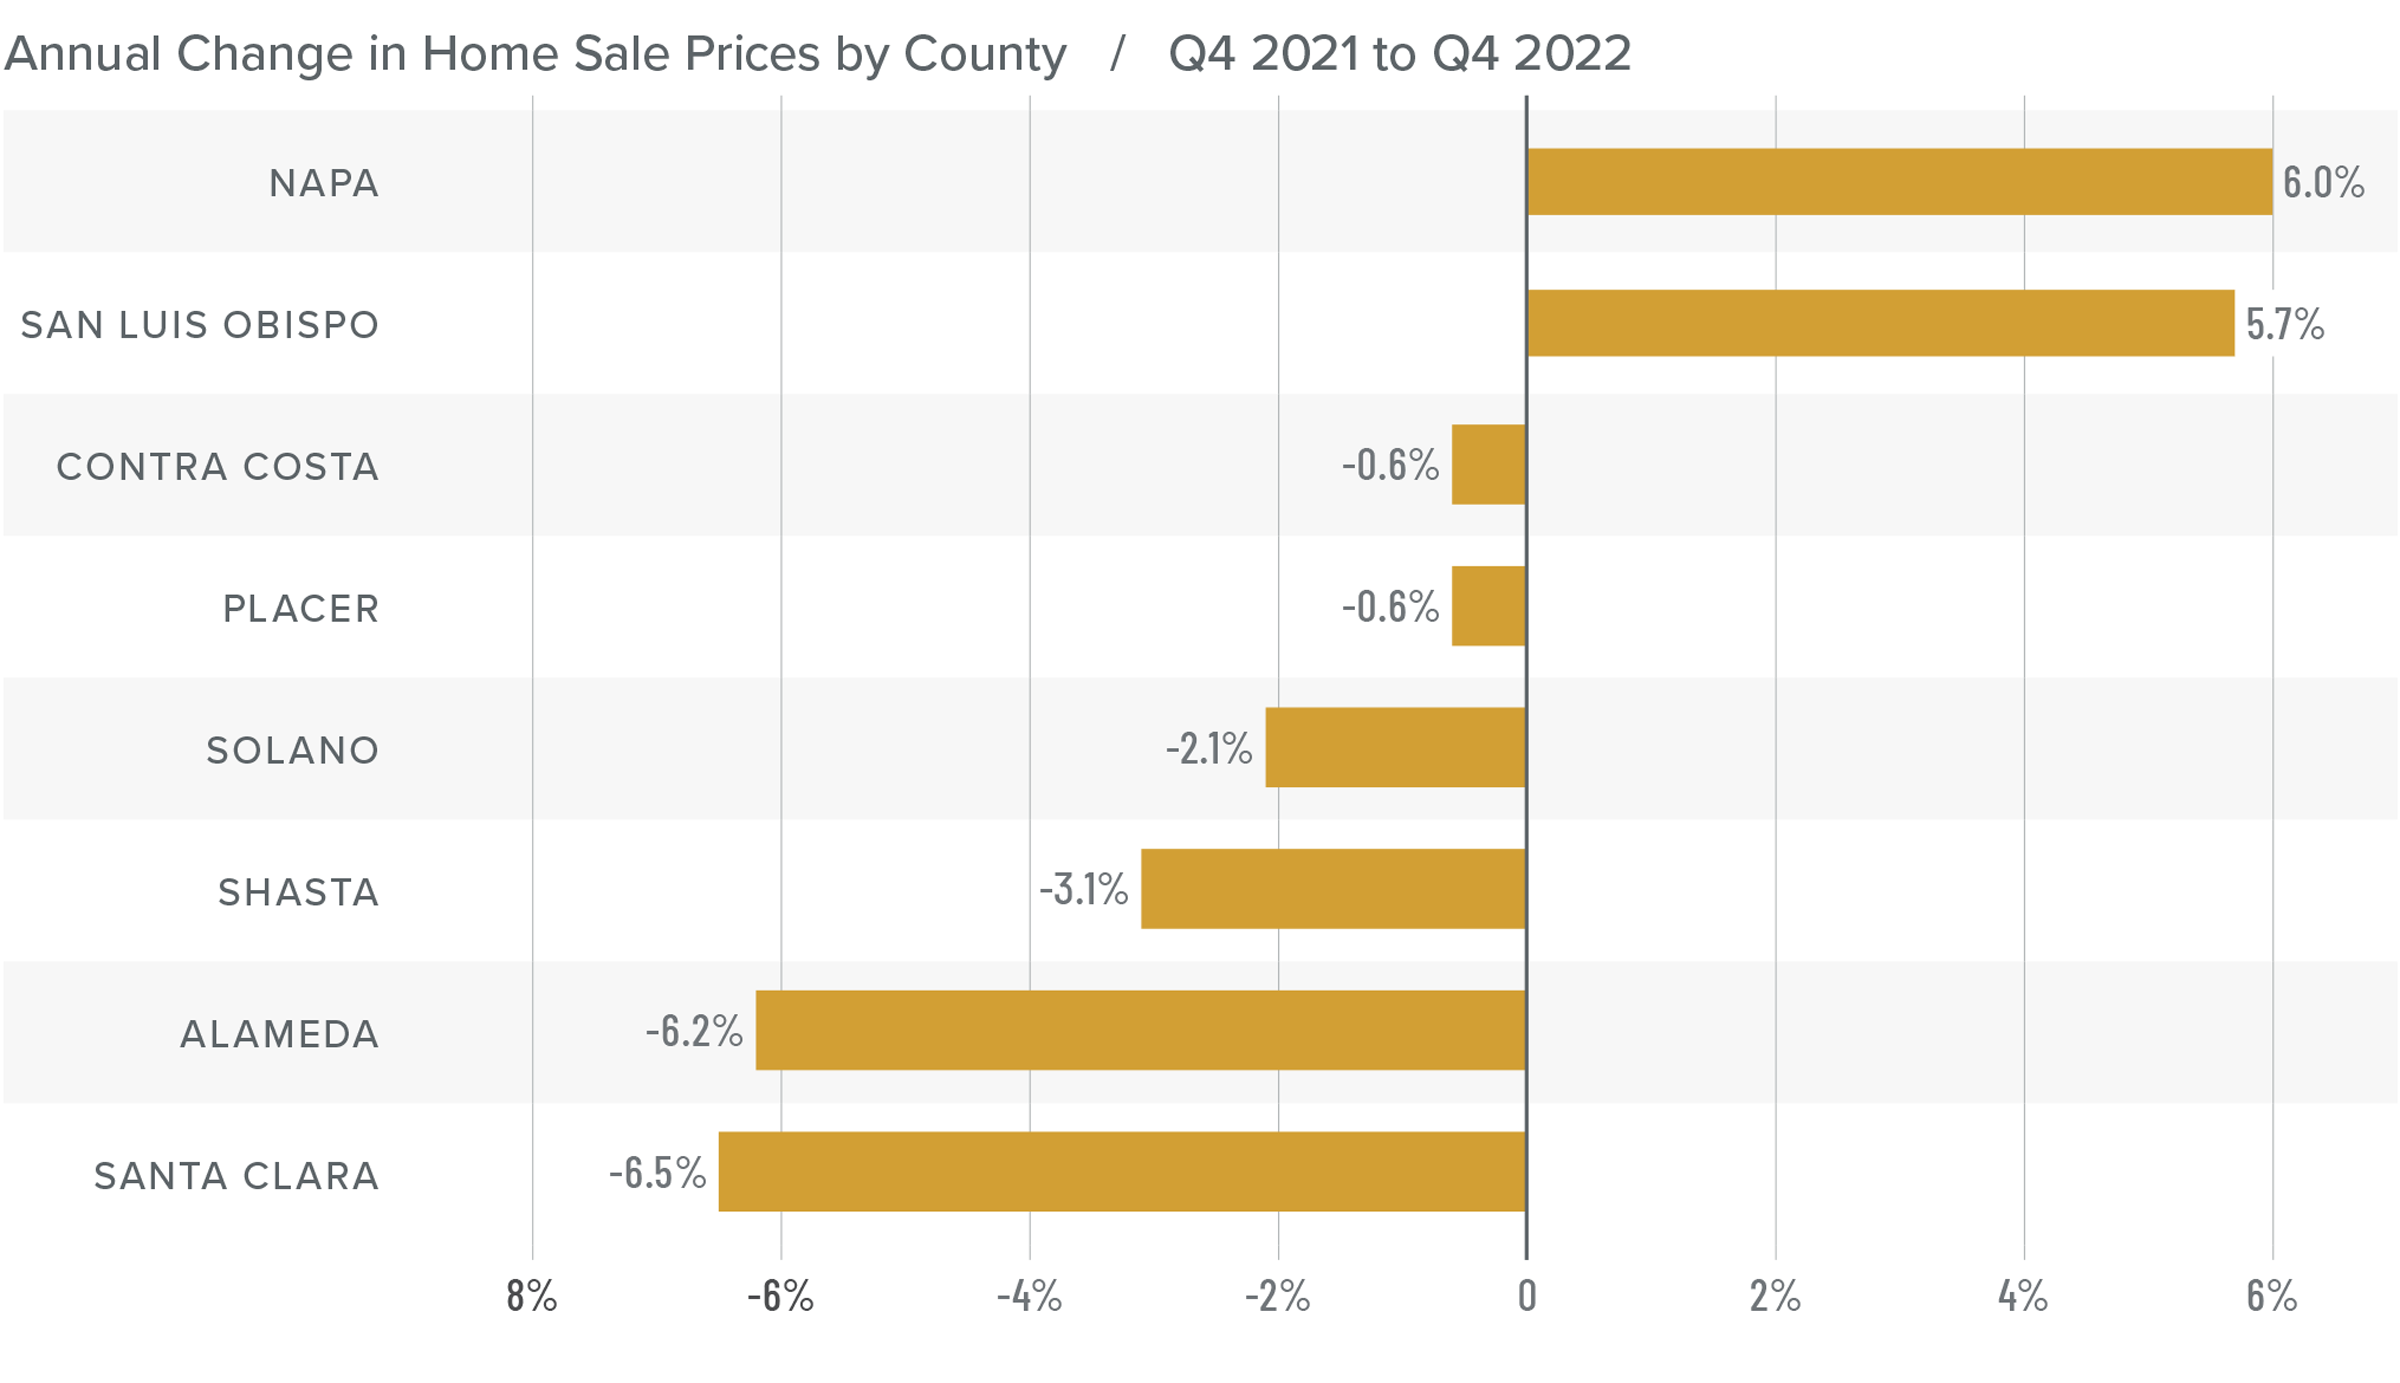 A bar graph showing the annual change in home sale prices for various counties in Northern California from Q4 2021 to Q4 2022. Napa County tops the list at 6%, followed by San Luis Obispo at 5.7%, Contra Costa and Placer at -0.6%, Solano at -2.1%, Shasta at -3.1%, Alameda at -6.2%, and Santa Clara at -6.5%.